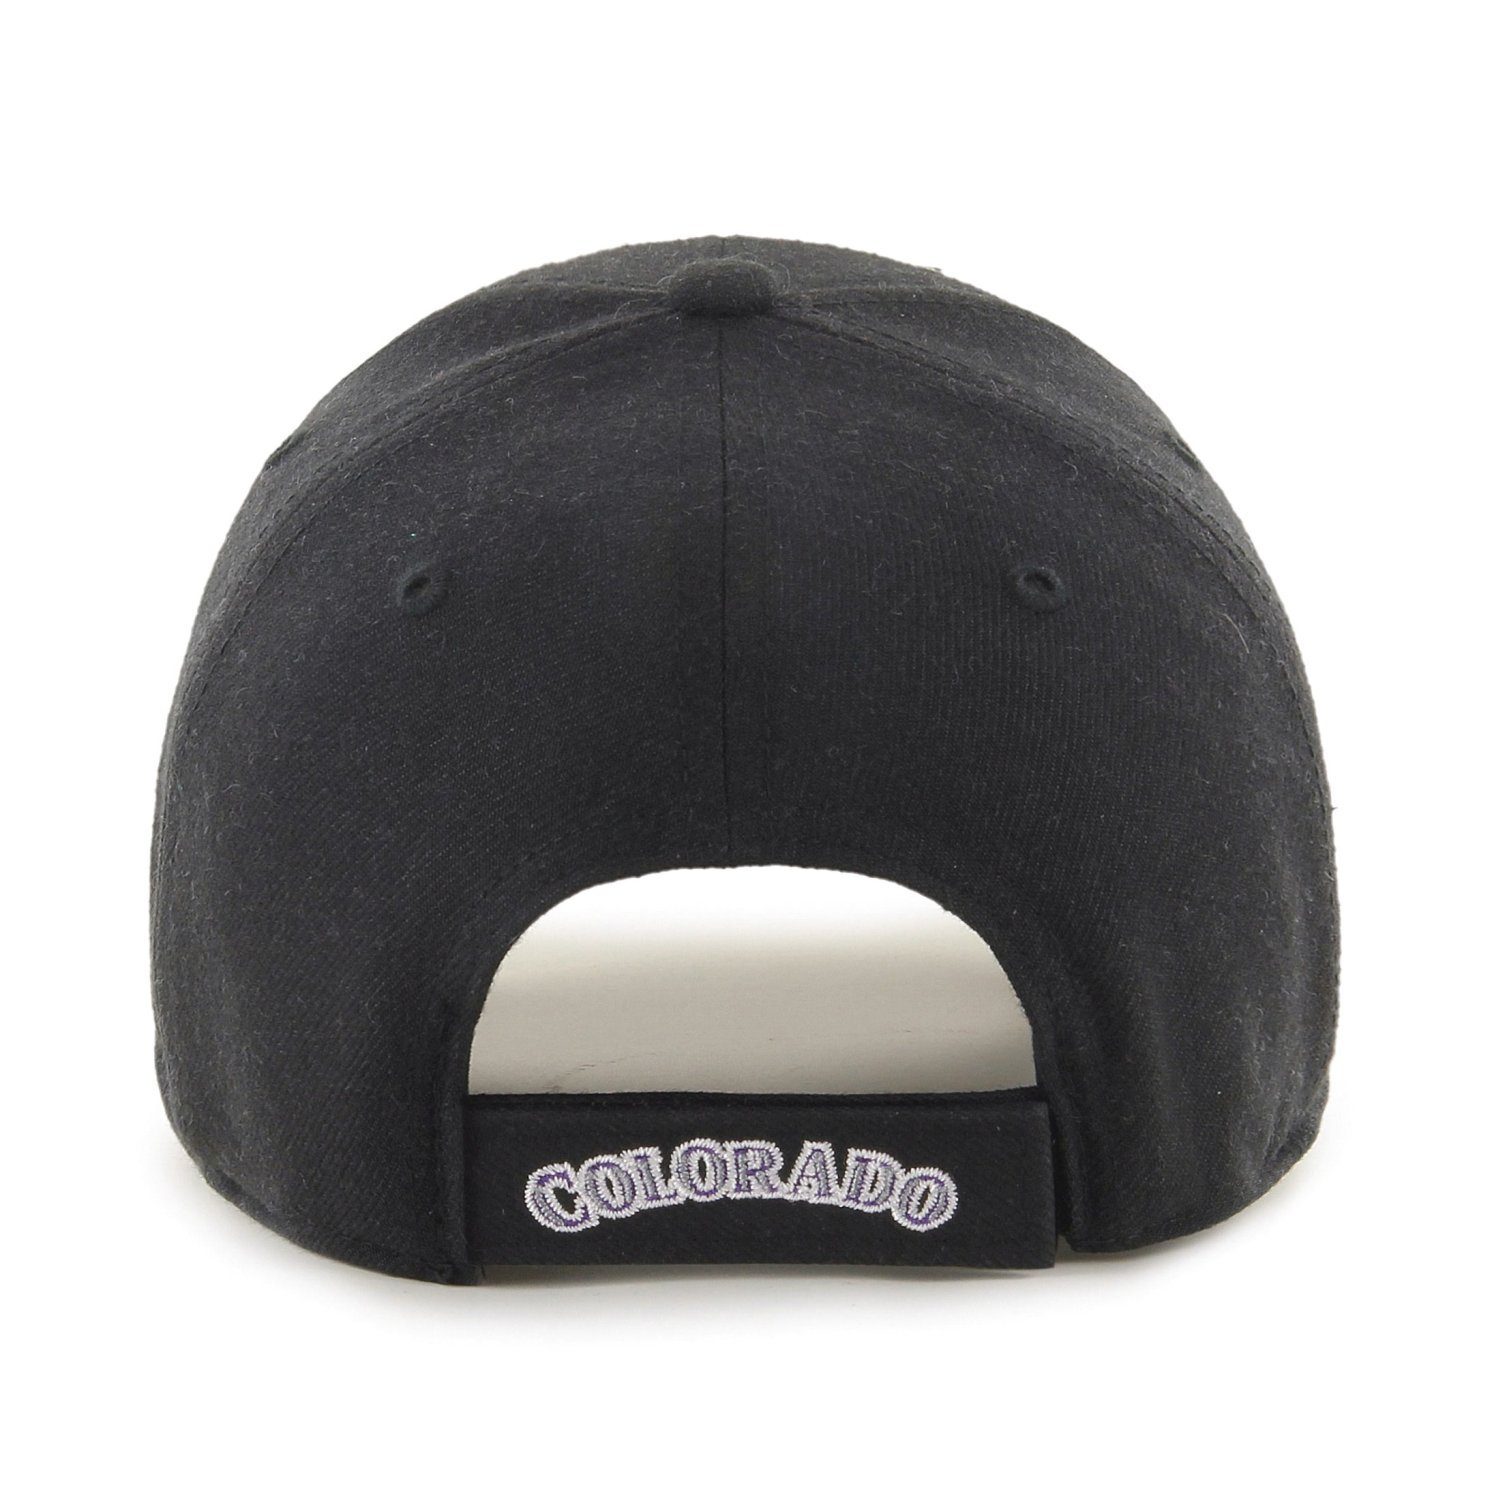 x27;47 Brand Cap Relaxed Rockies Trucker MLB Fit Colorado